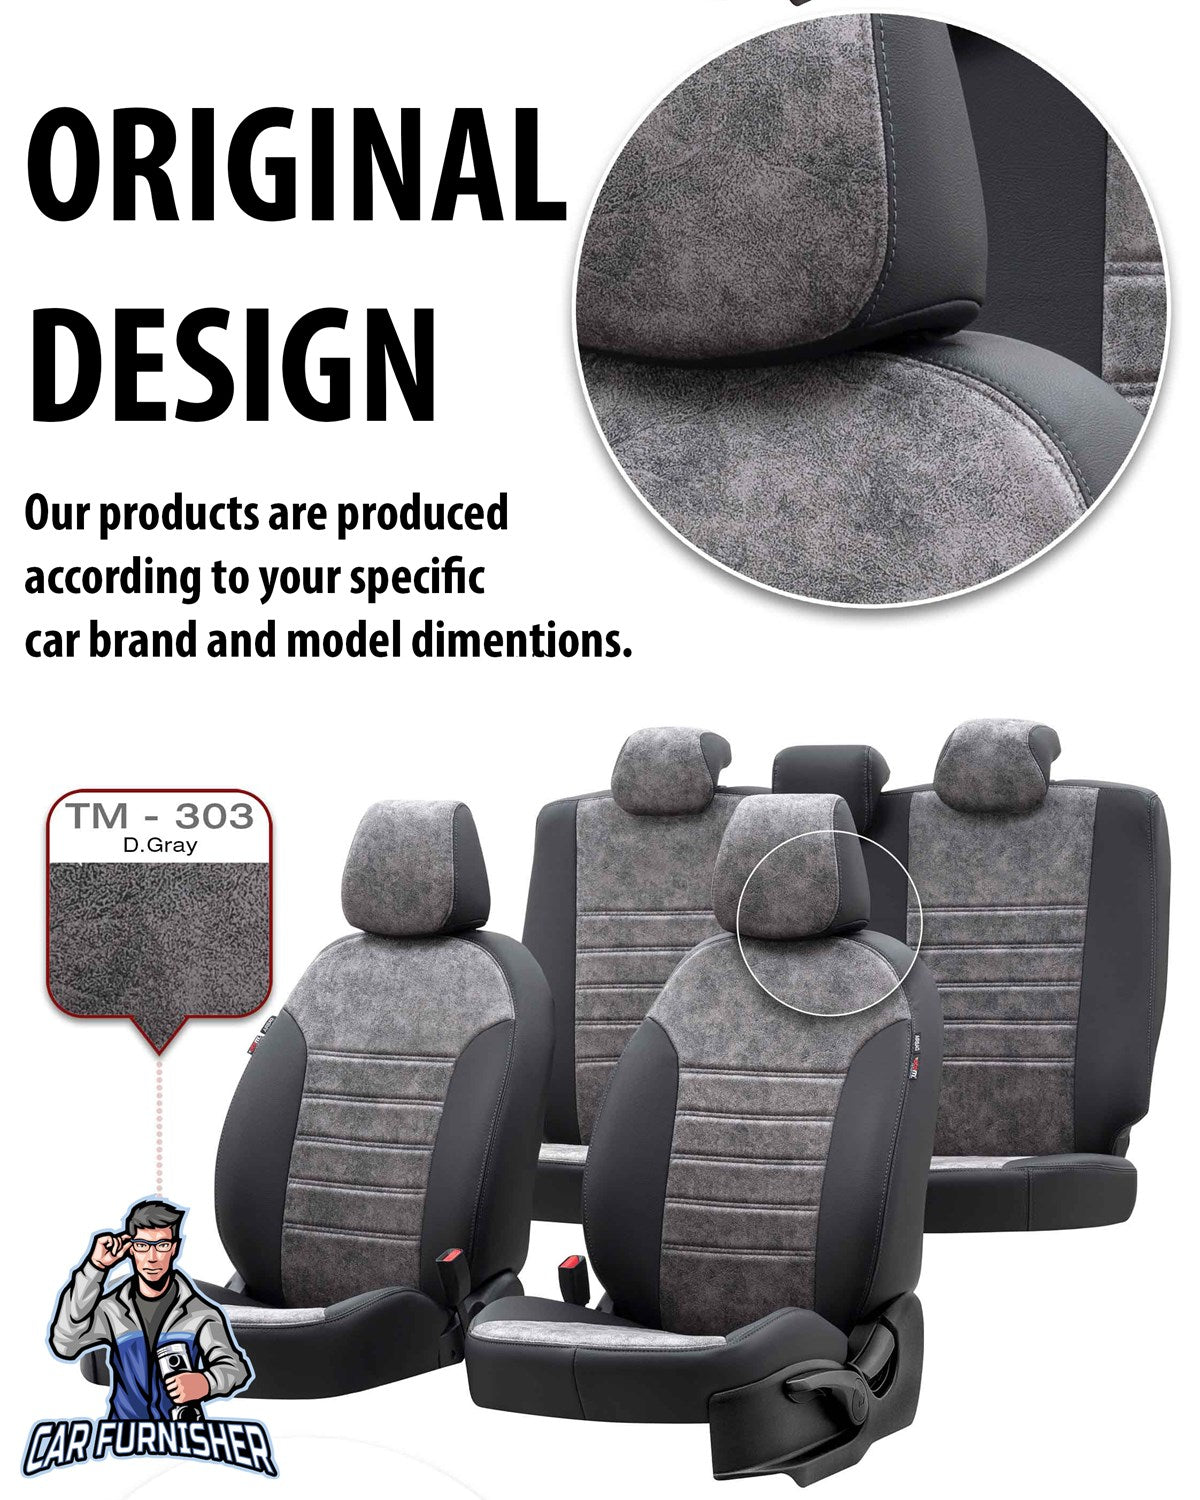 Volvo V50 Seat Cover Milano Suede Design Burgundy Leather & Suede Fabric